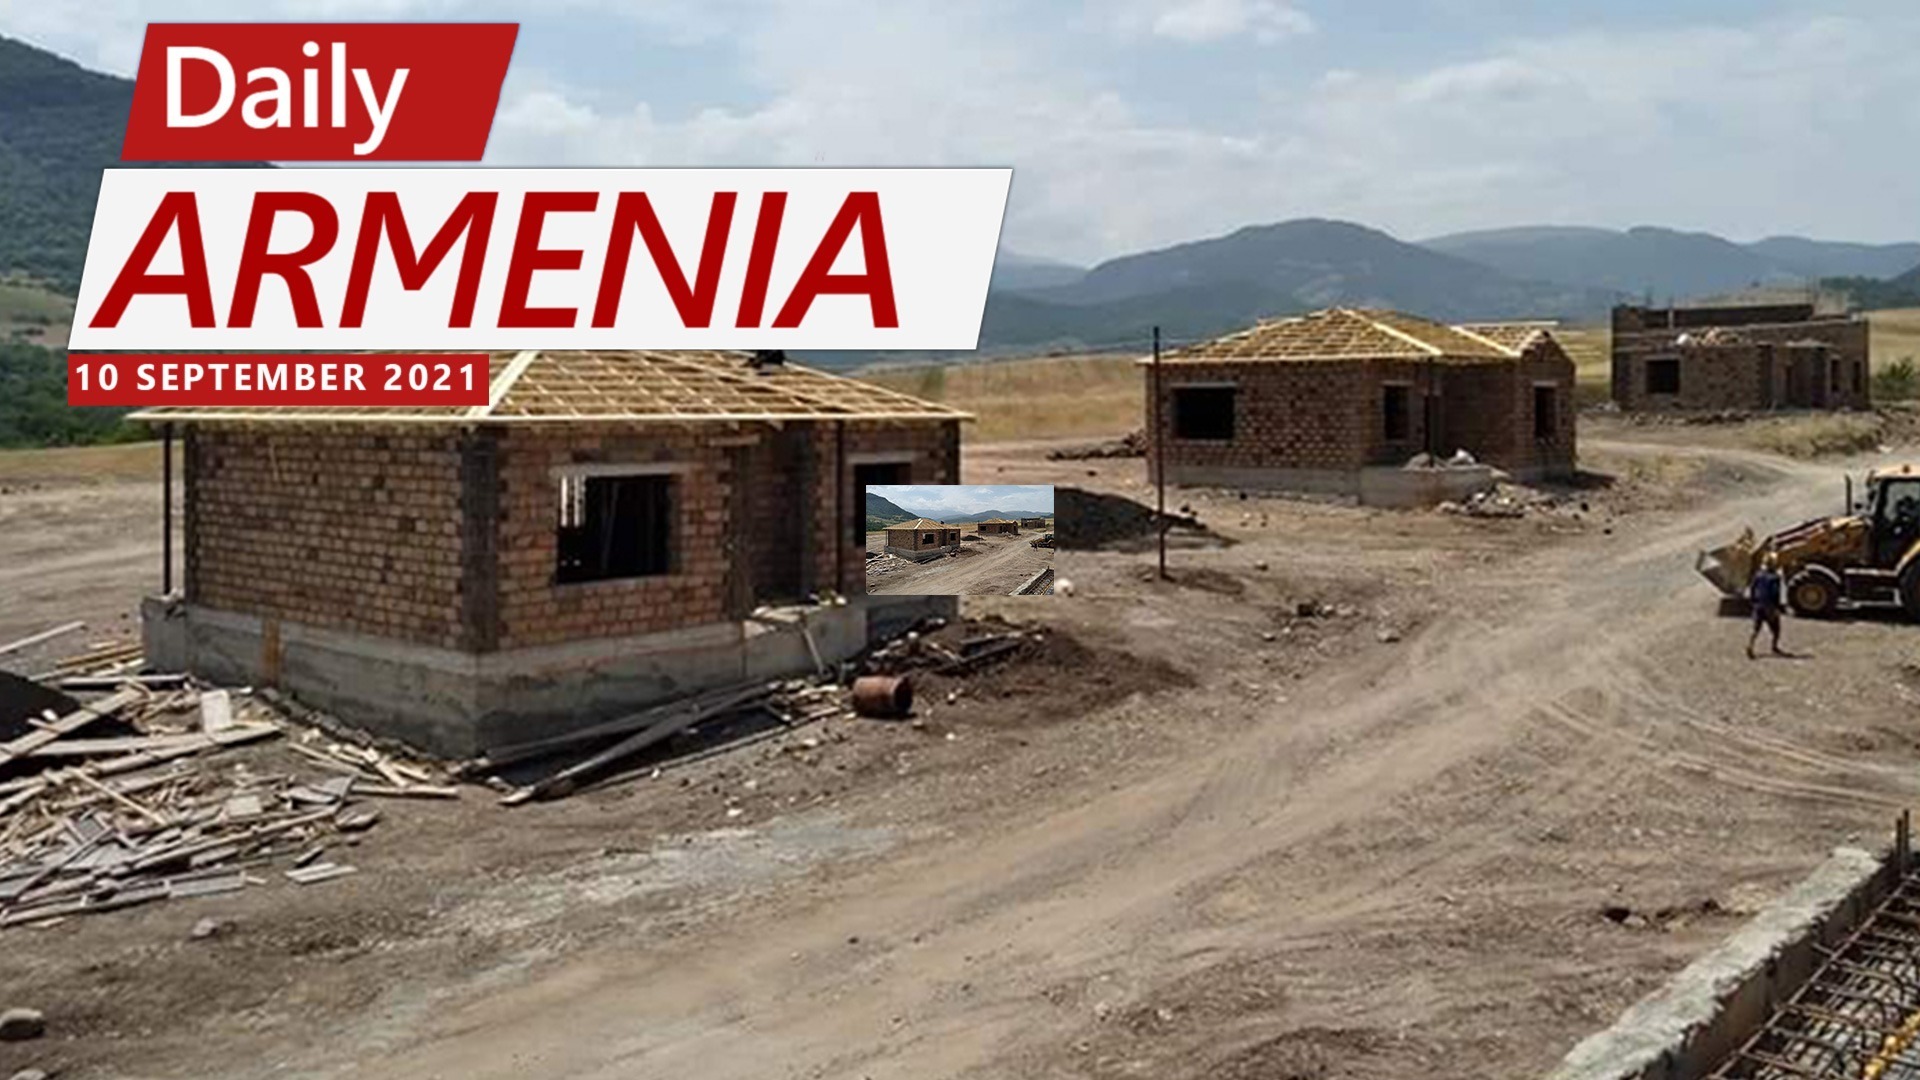 600 homes will be built in Karabakh’s Askeran region for the internally displaced